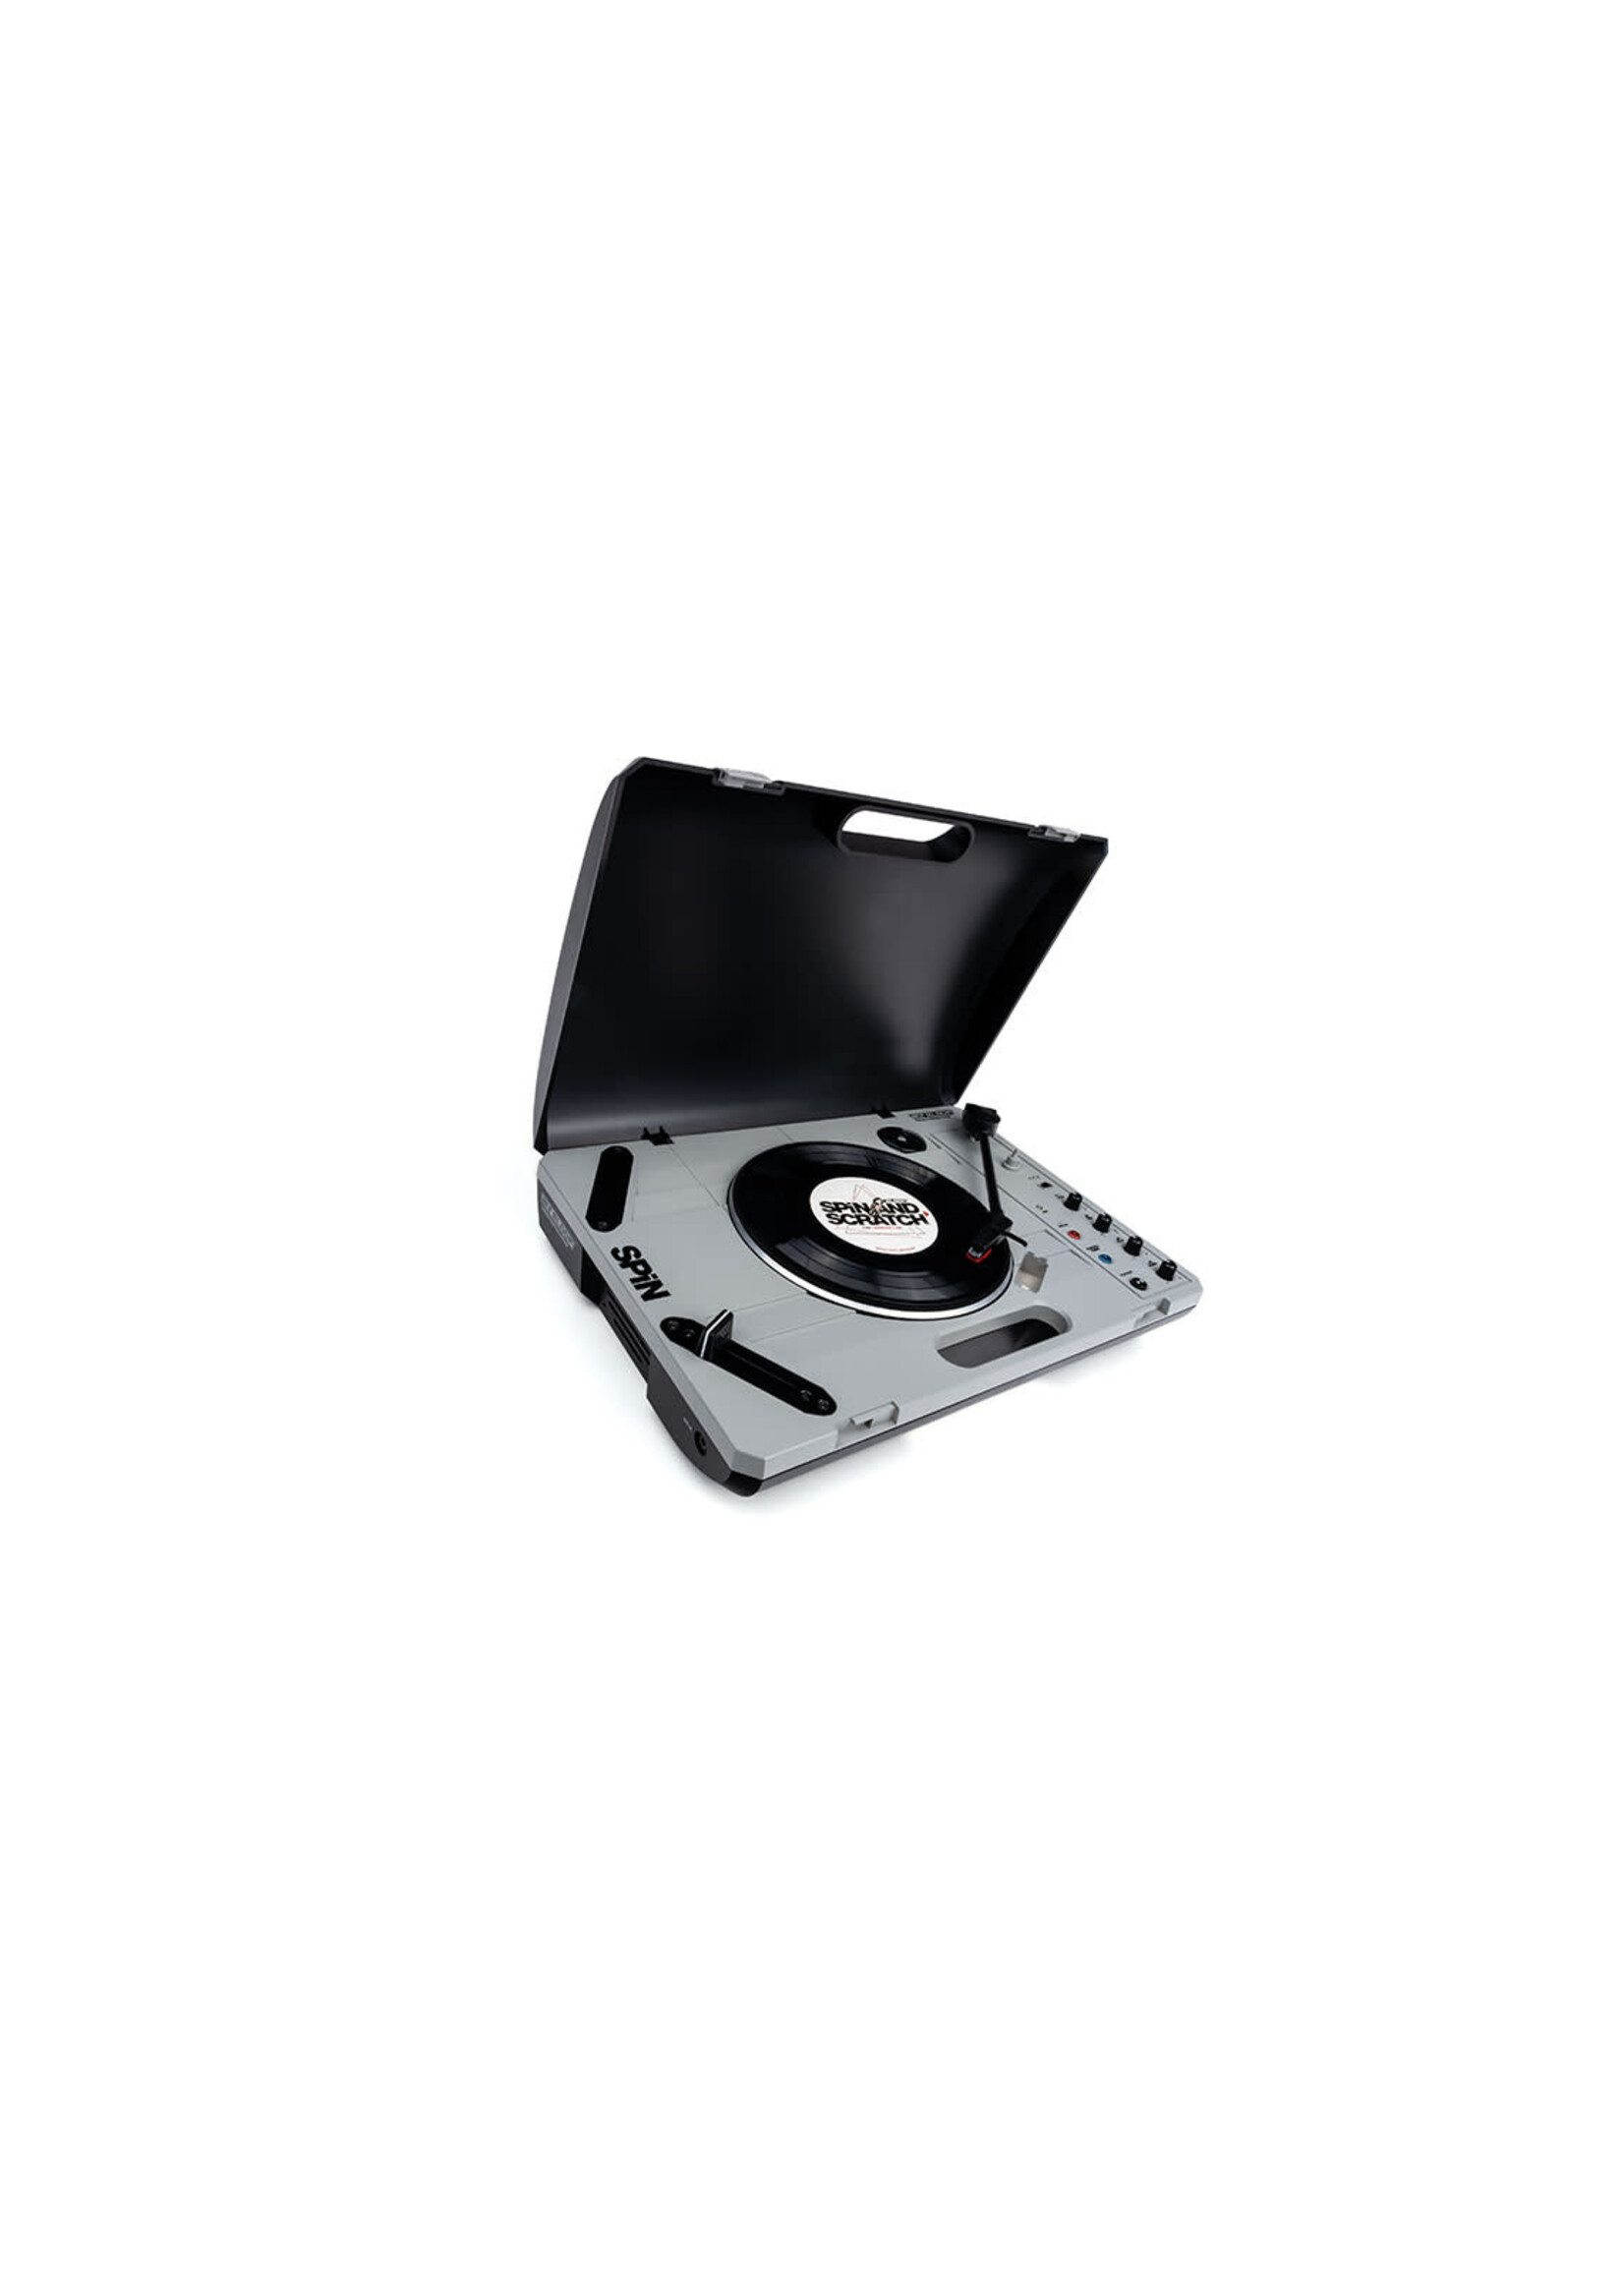 Reloop SPIN Portable DJ Turntable w/ Bluetooth, USB Recording, 7